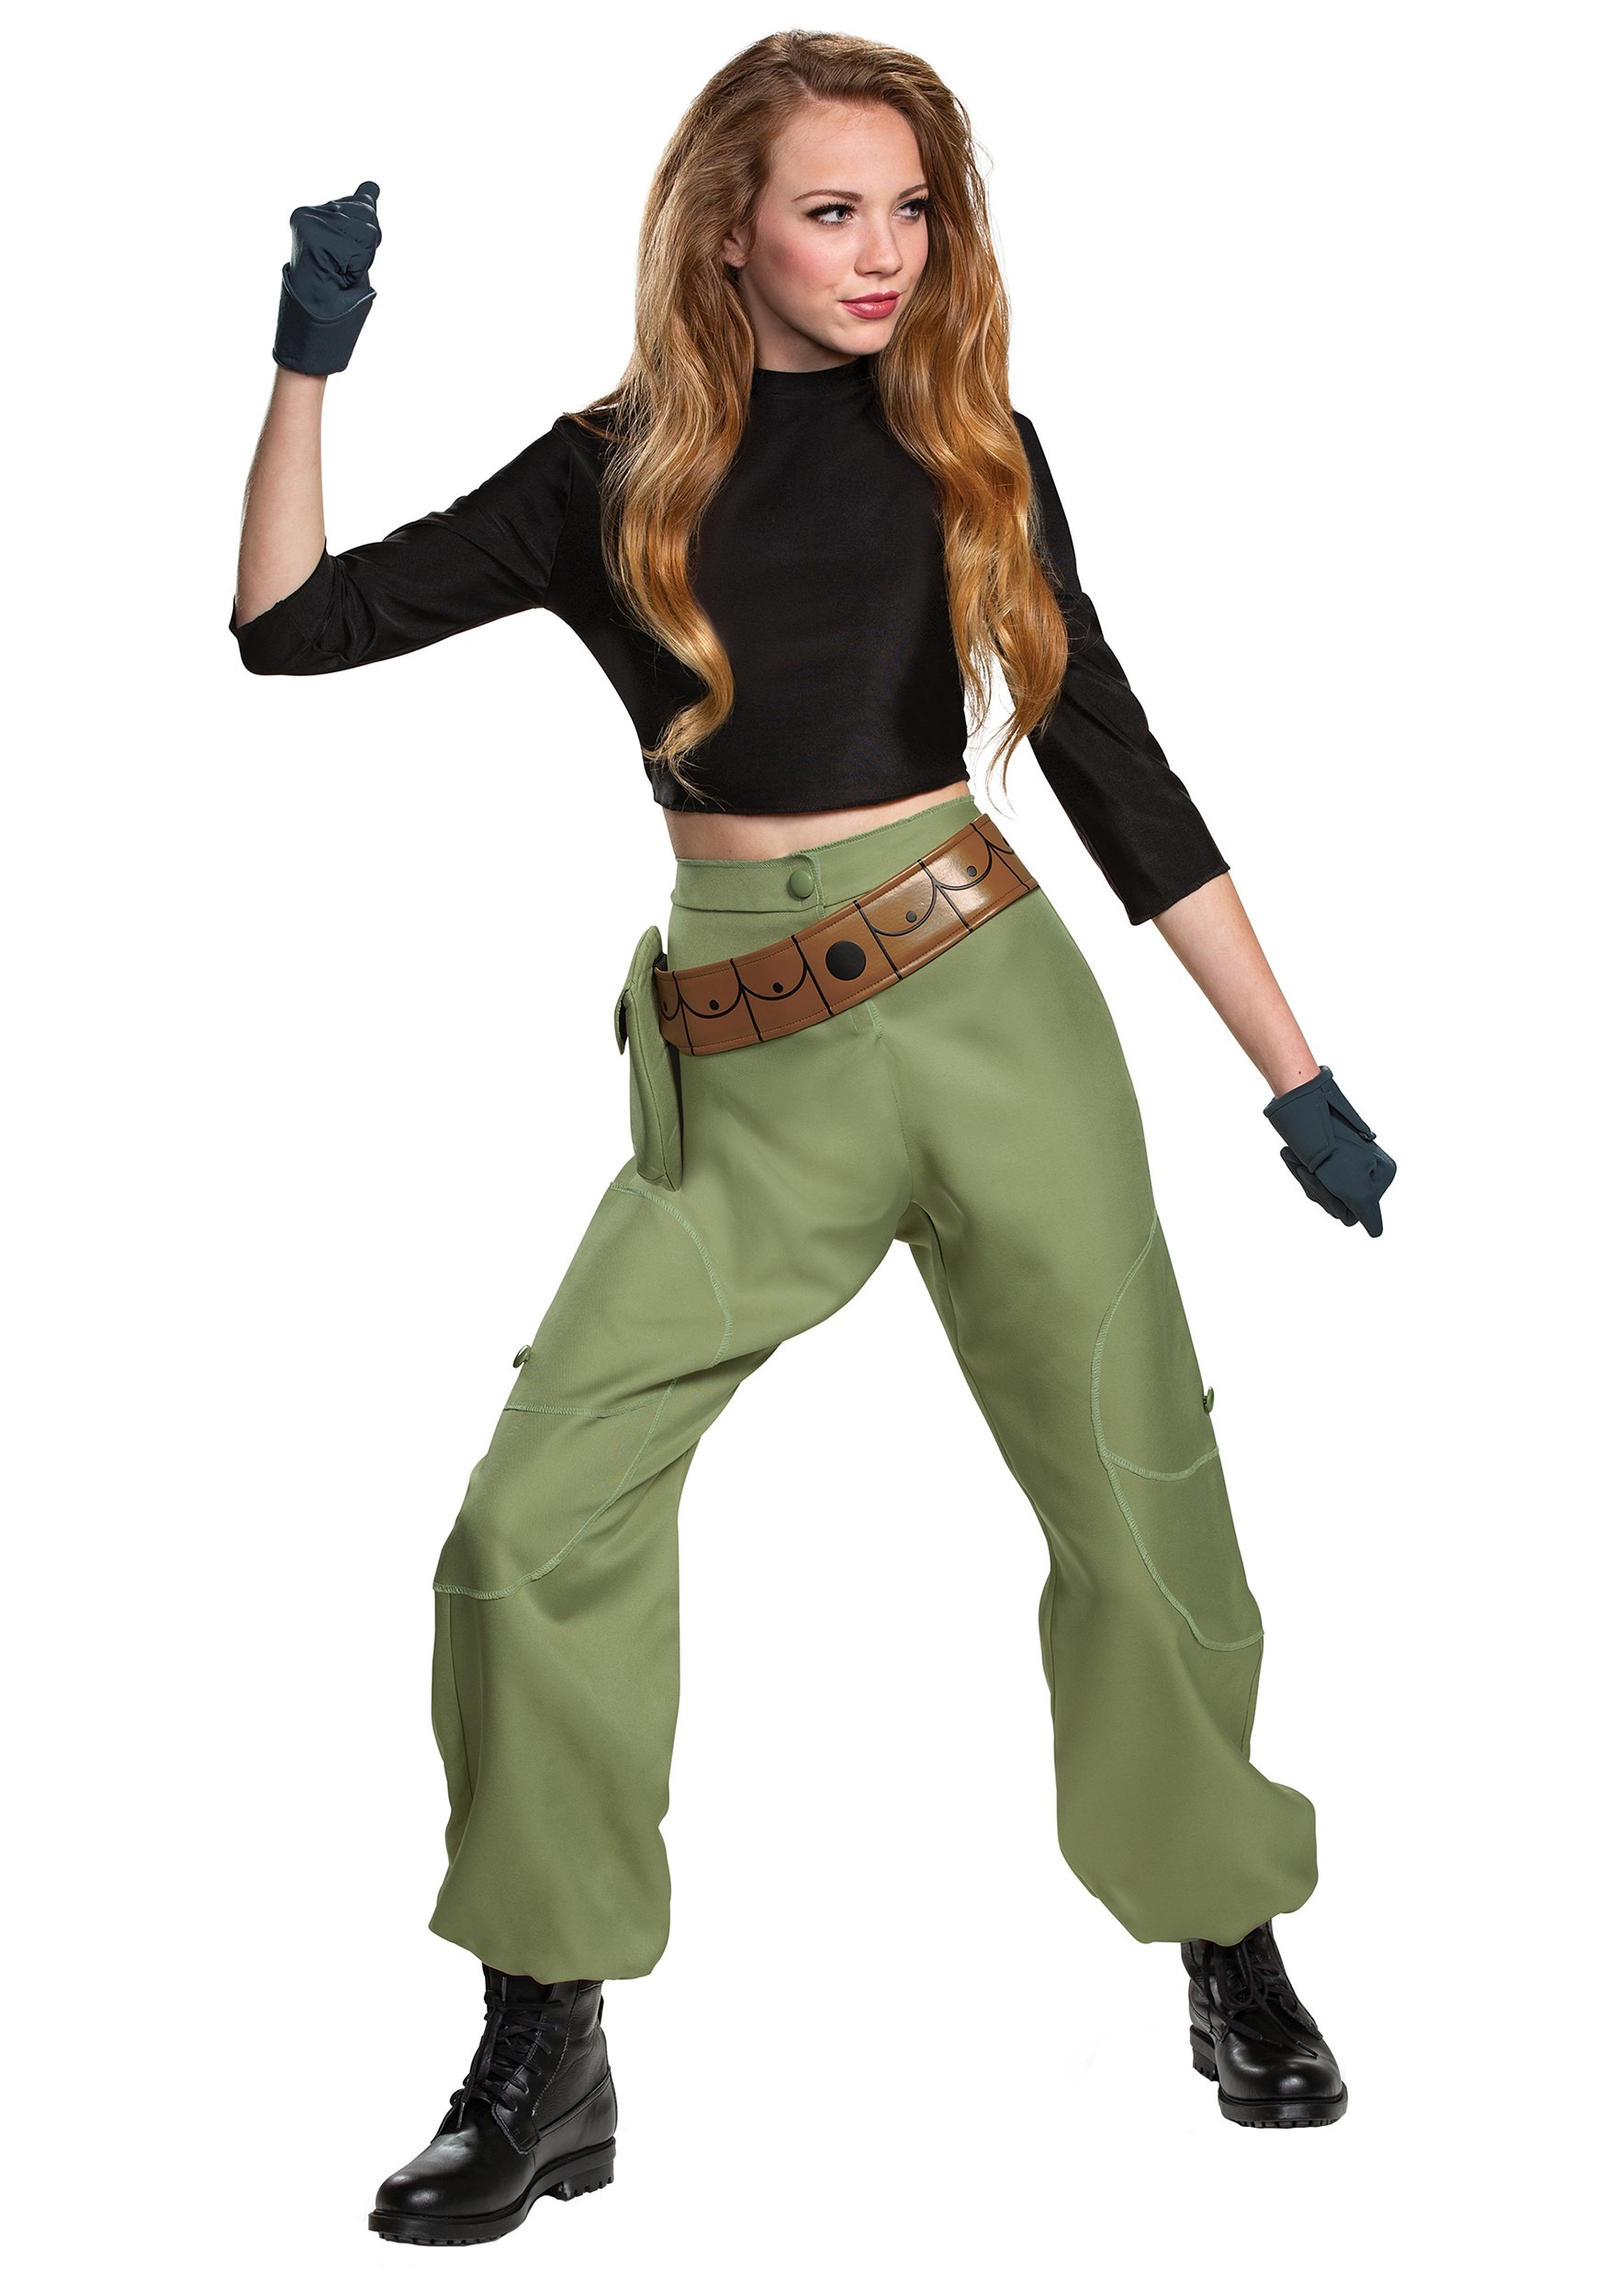 Kim Possible Animated Series Kim Possible Fancy Dress Costume For Women